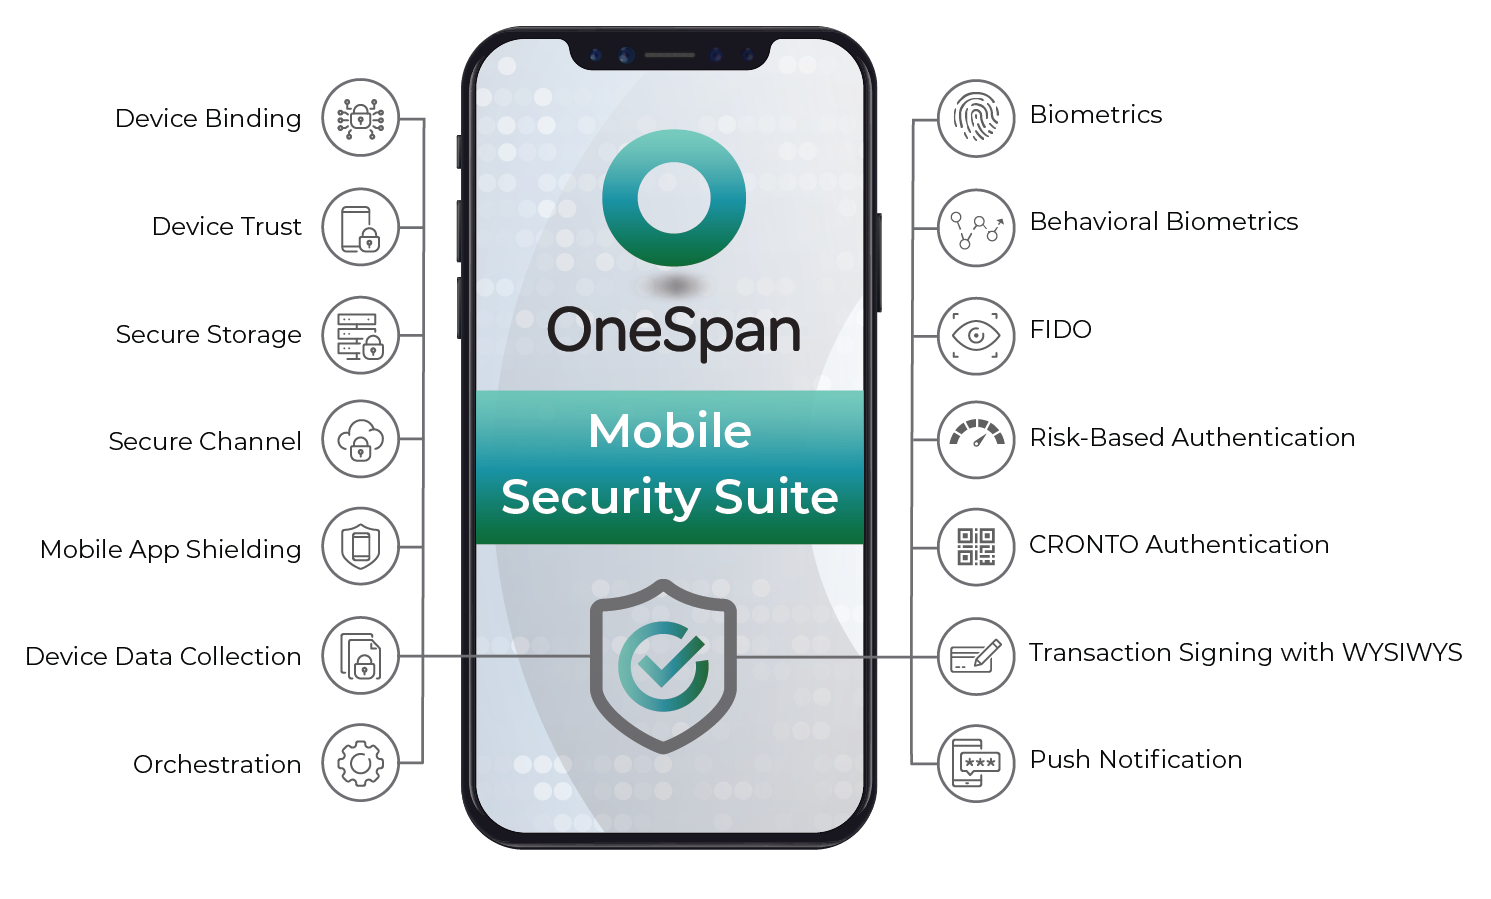 OneSpan Mobile Security Suite